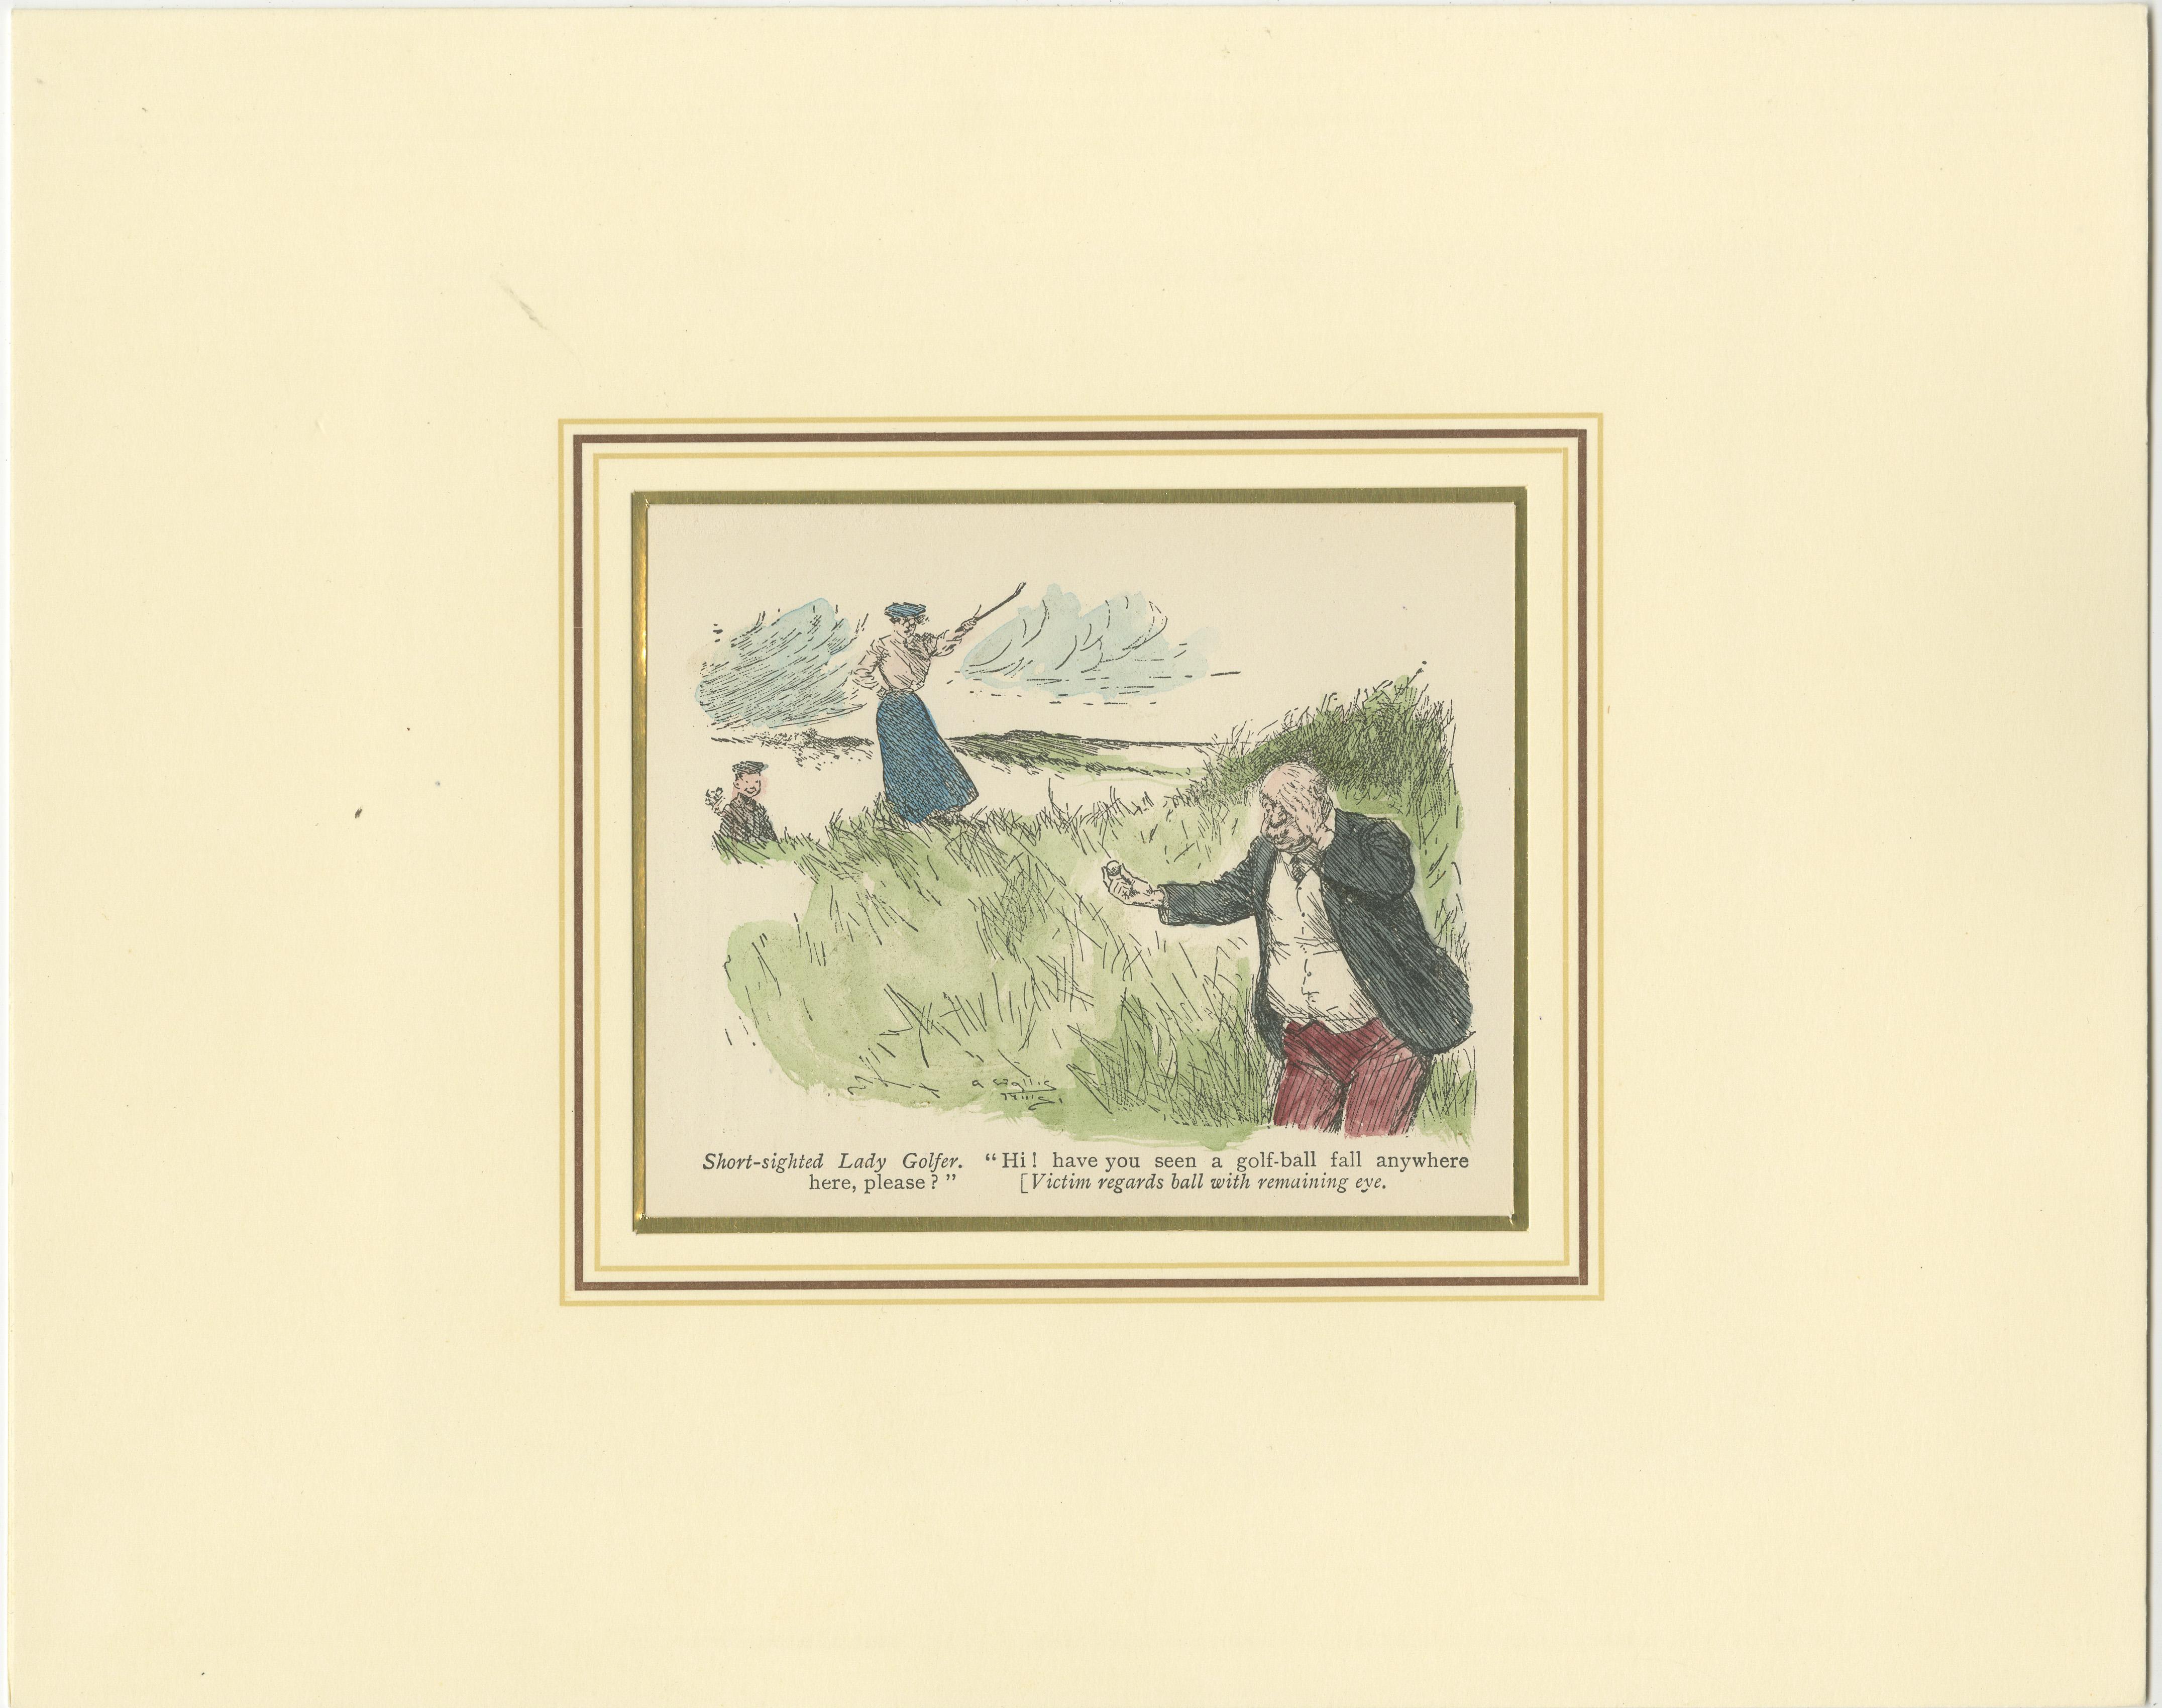 Set of 4 original antique prints of golf scenes originating from 'Mr. Punch’s Golf Stories'. Mr. Punch's Golf Stories includes an array of delightful short stories and poems on the royal and ancient pastime of golf, each accompanied by a number of